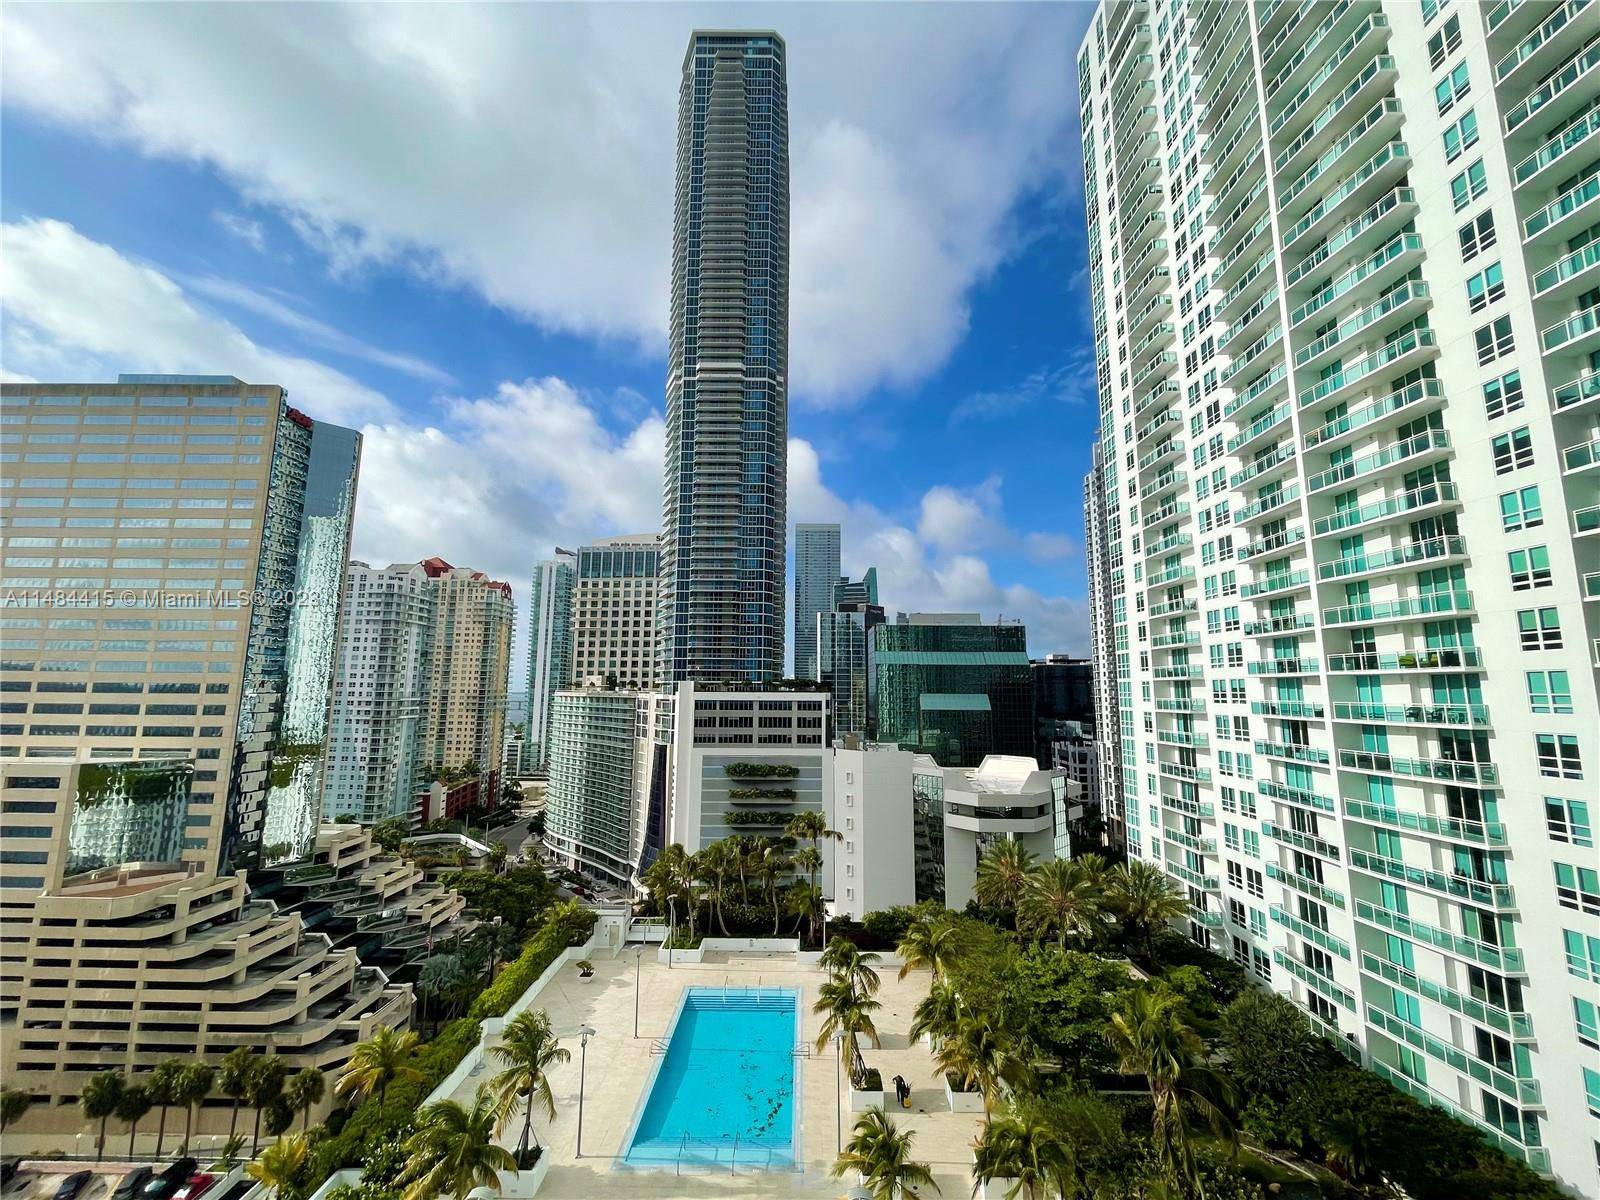 Rarely available Line 07 2 Bedroom, 2 Bathroom with split floor plan, spacious living room and expanded balcony at the Plaza in the heart of Brickell.